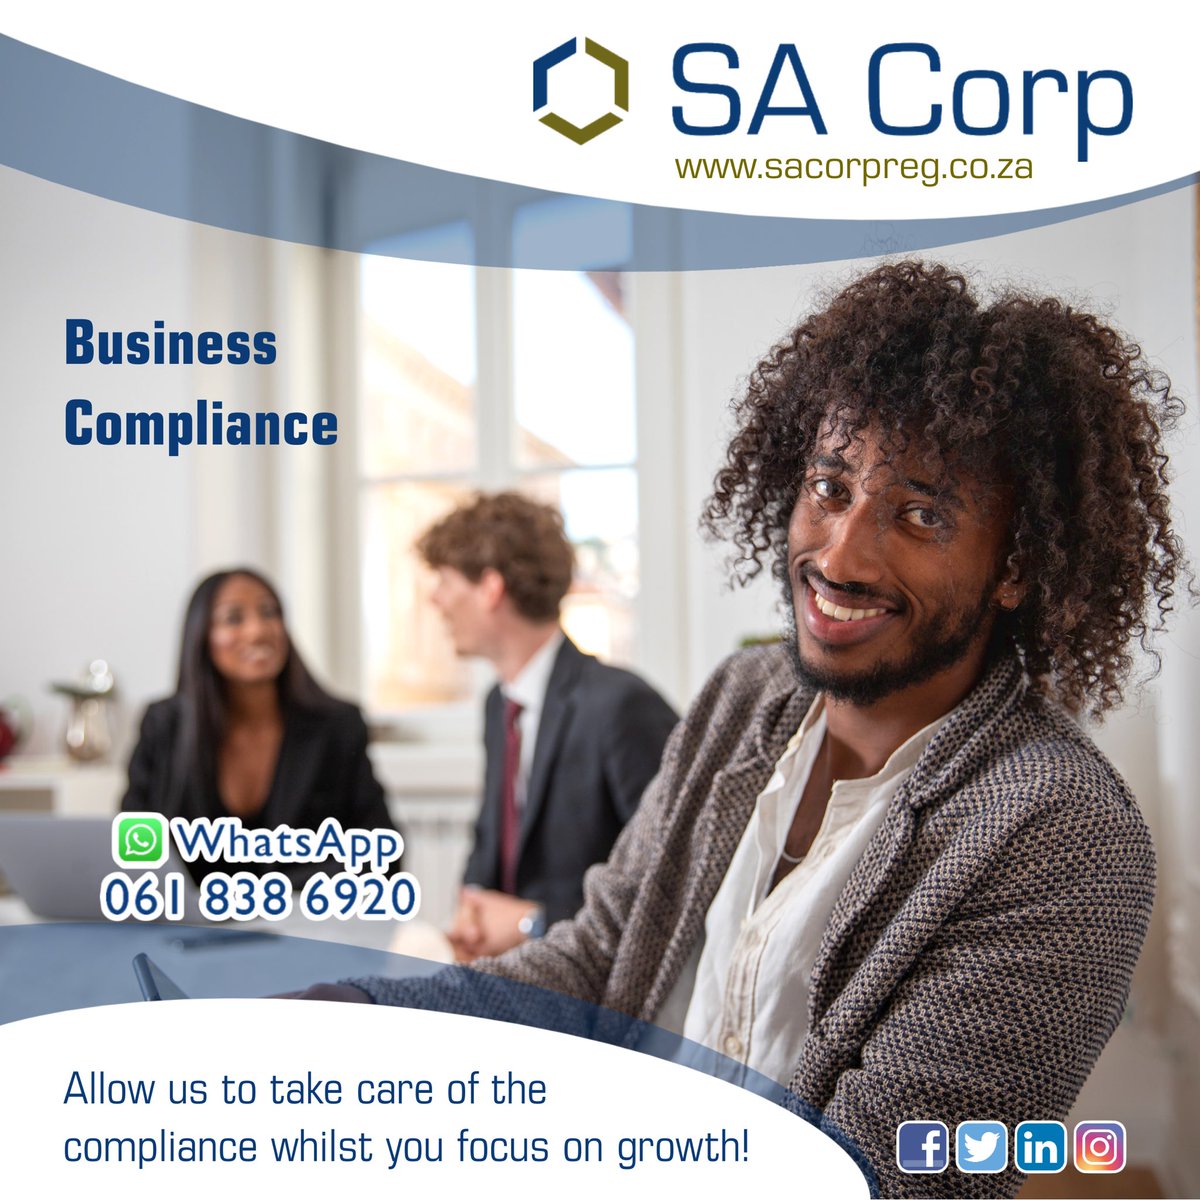 Our team is here to handle all your compliance needs, so you can focus on what you do best – growing your business!
#SACorpReg #CorporateRegistrations #BusinessRegistrations #compliance #BusinessServices #RegisterMyBusiness #StartABusiness #Entrepreneur #taigeisdigital